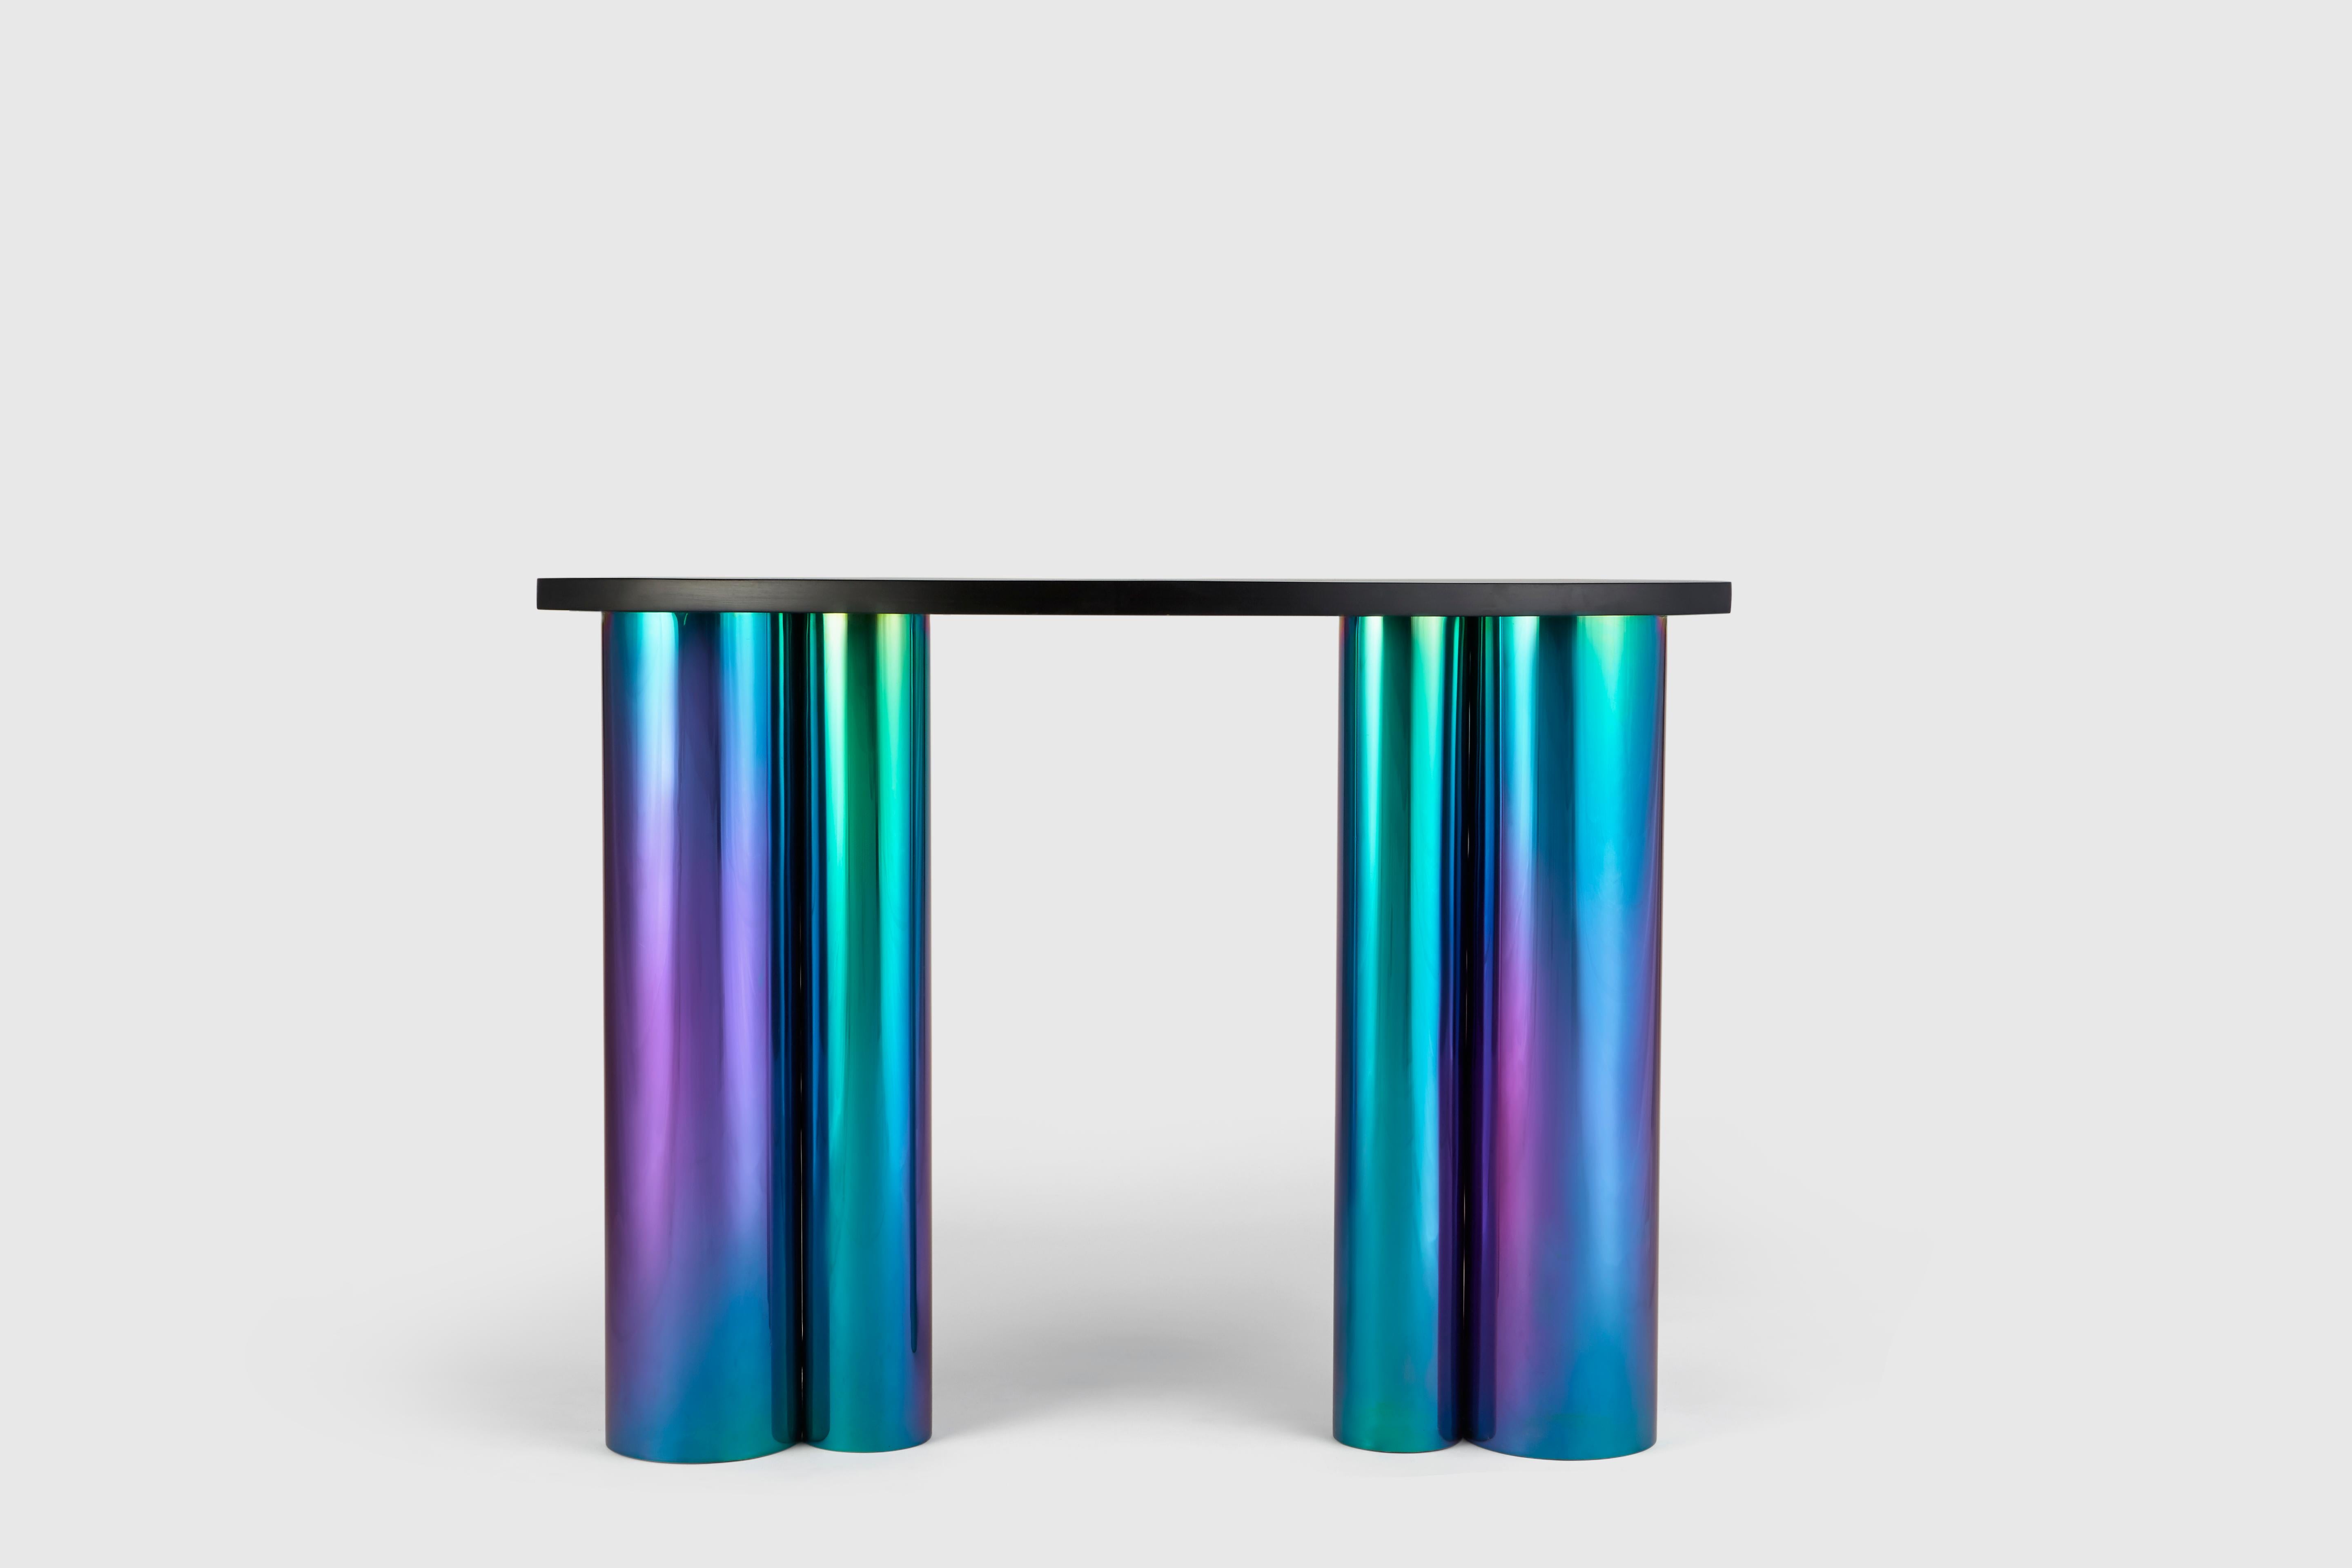 Unique bloom table by Hatsu
Dimensions: D 40 x W 40 x H 80 cm 
Materials: Stained solid wood on eloctroplated steel body

Hatsu is a design studio based in Mumbai that creates modern lighting that are unique and immediately recognisable. We started